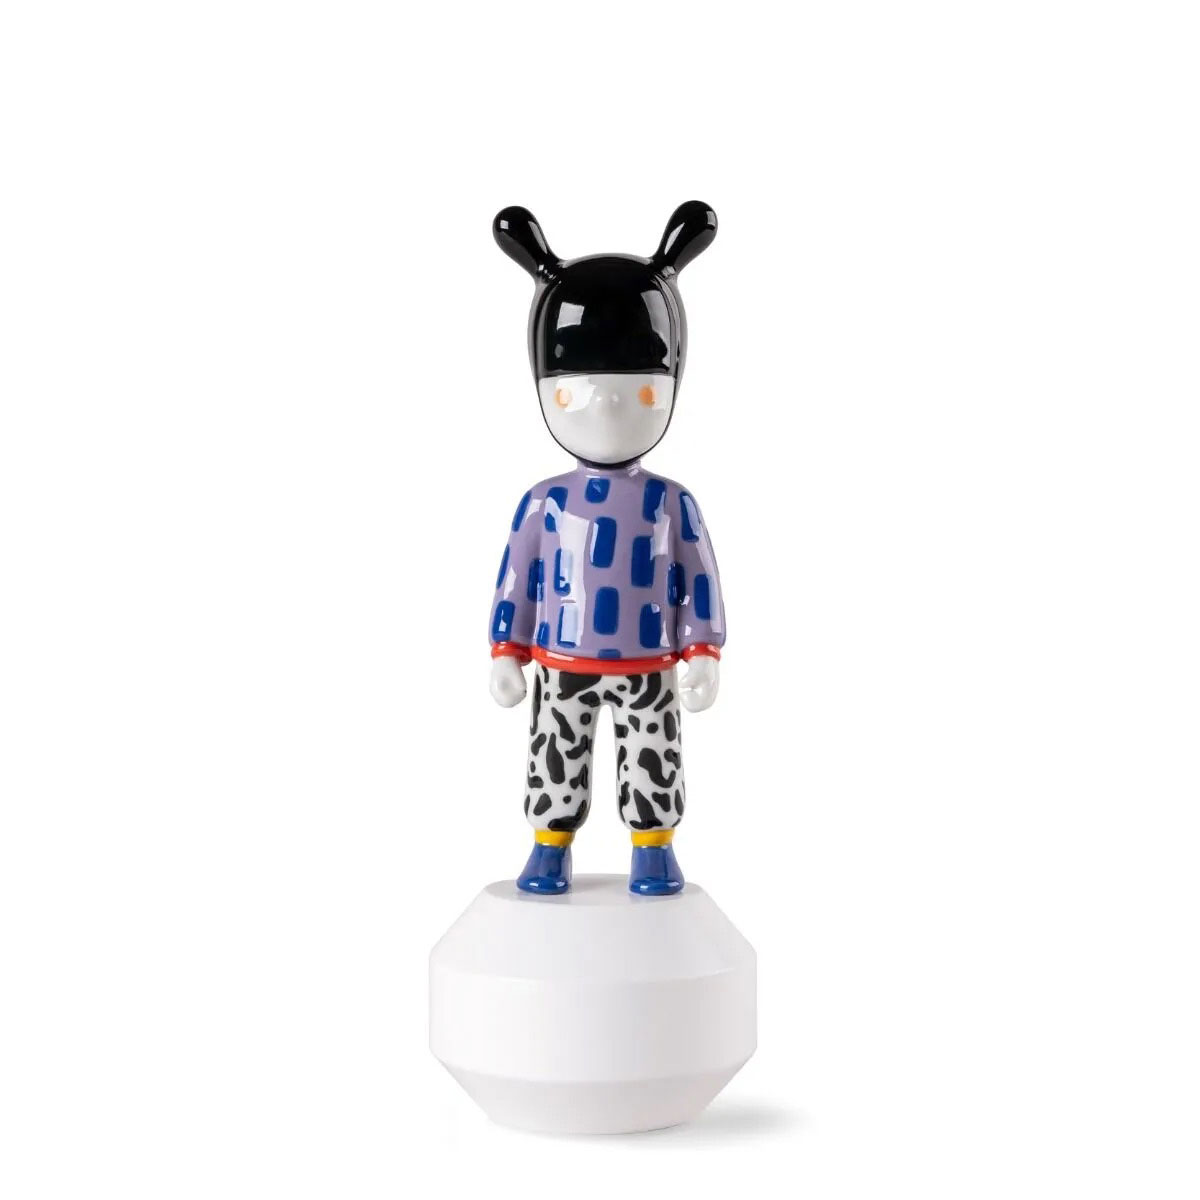 Lladro The Guest by Camille Walala - Little